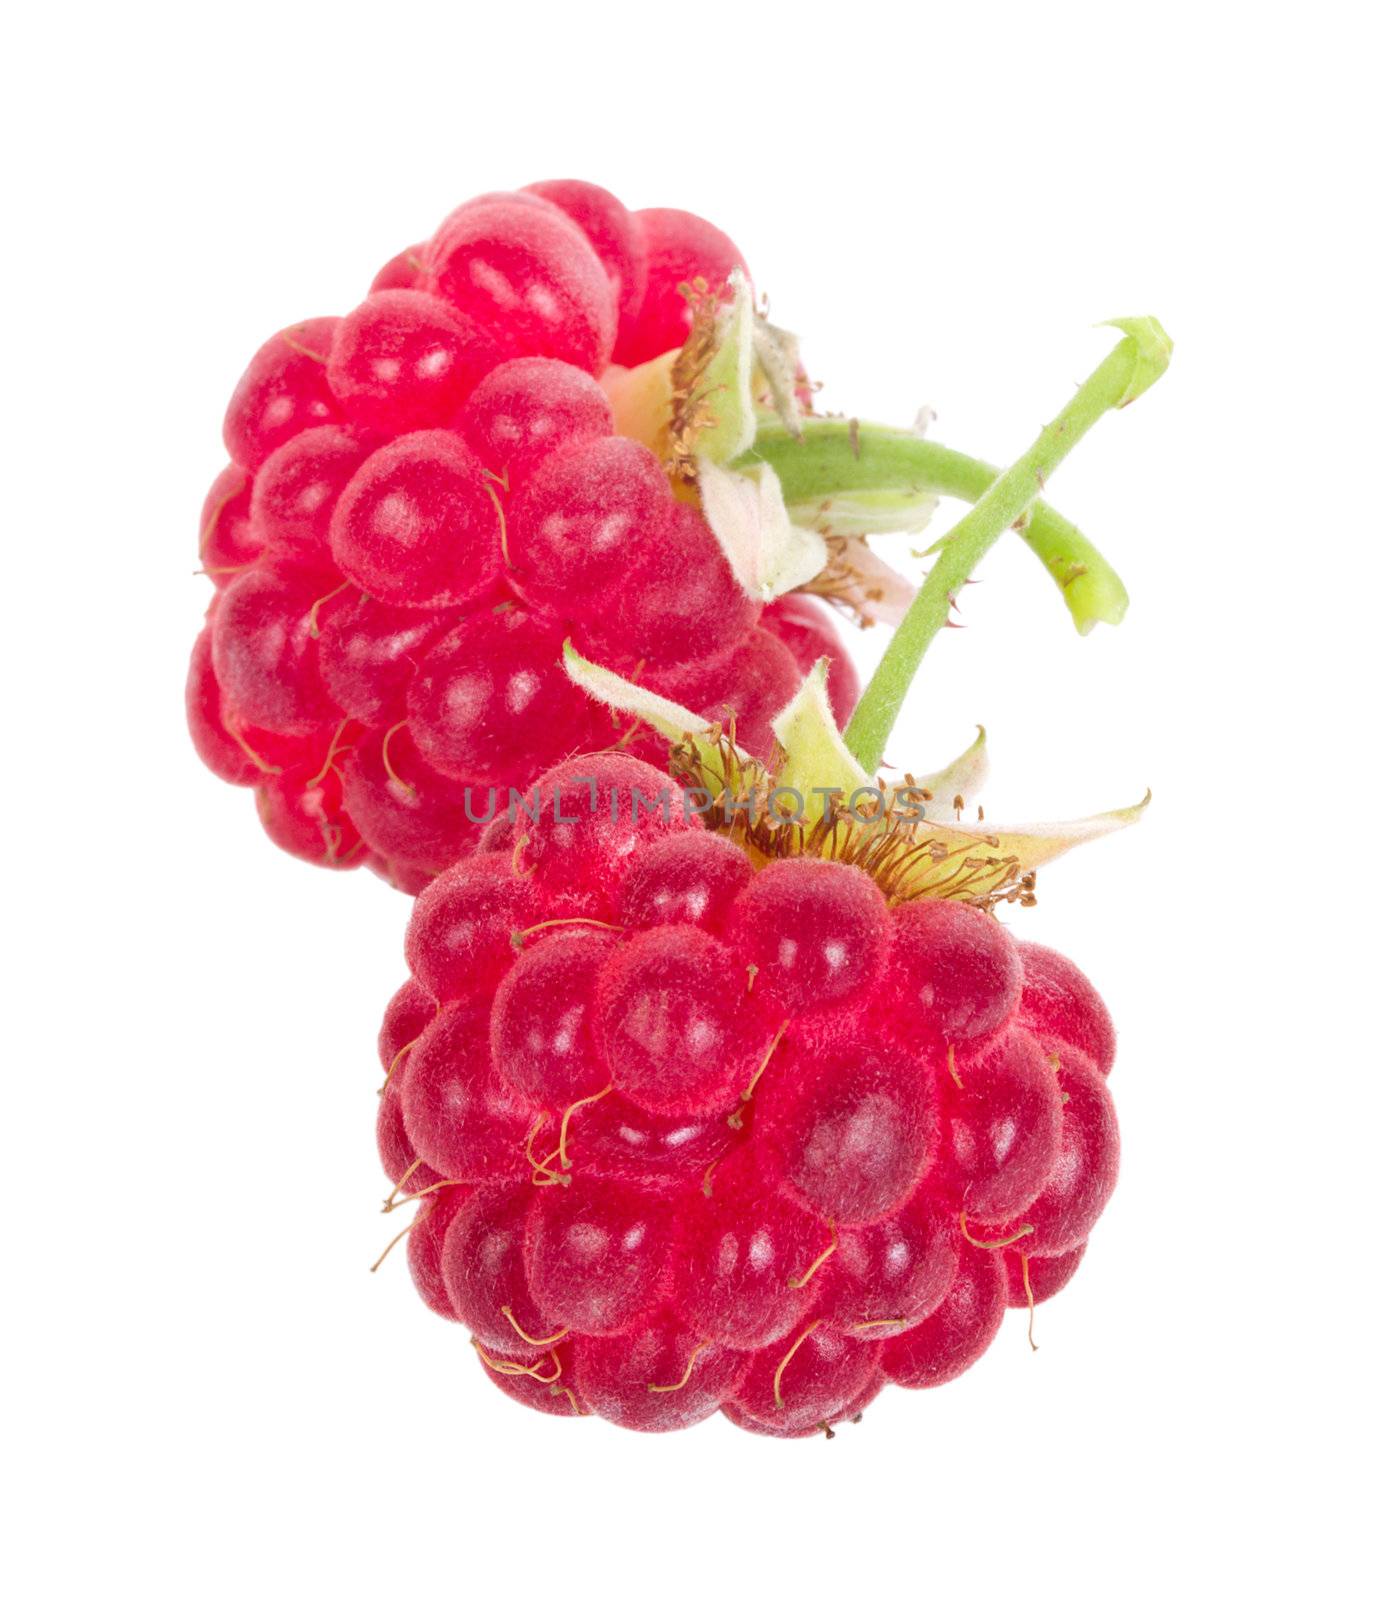 two ripe raspberries, isolated on white